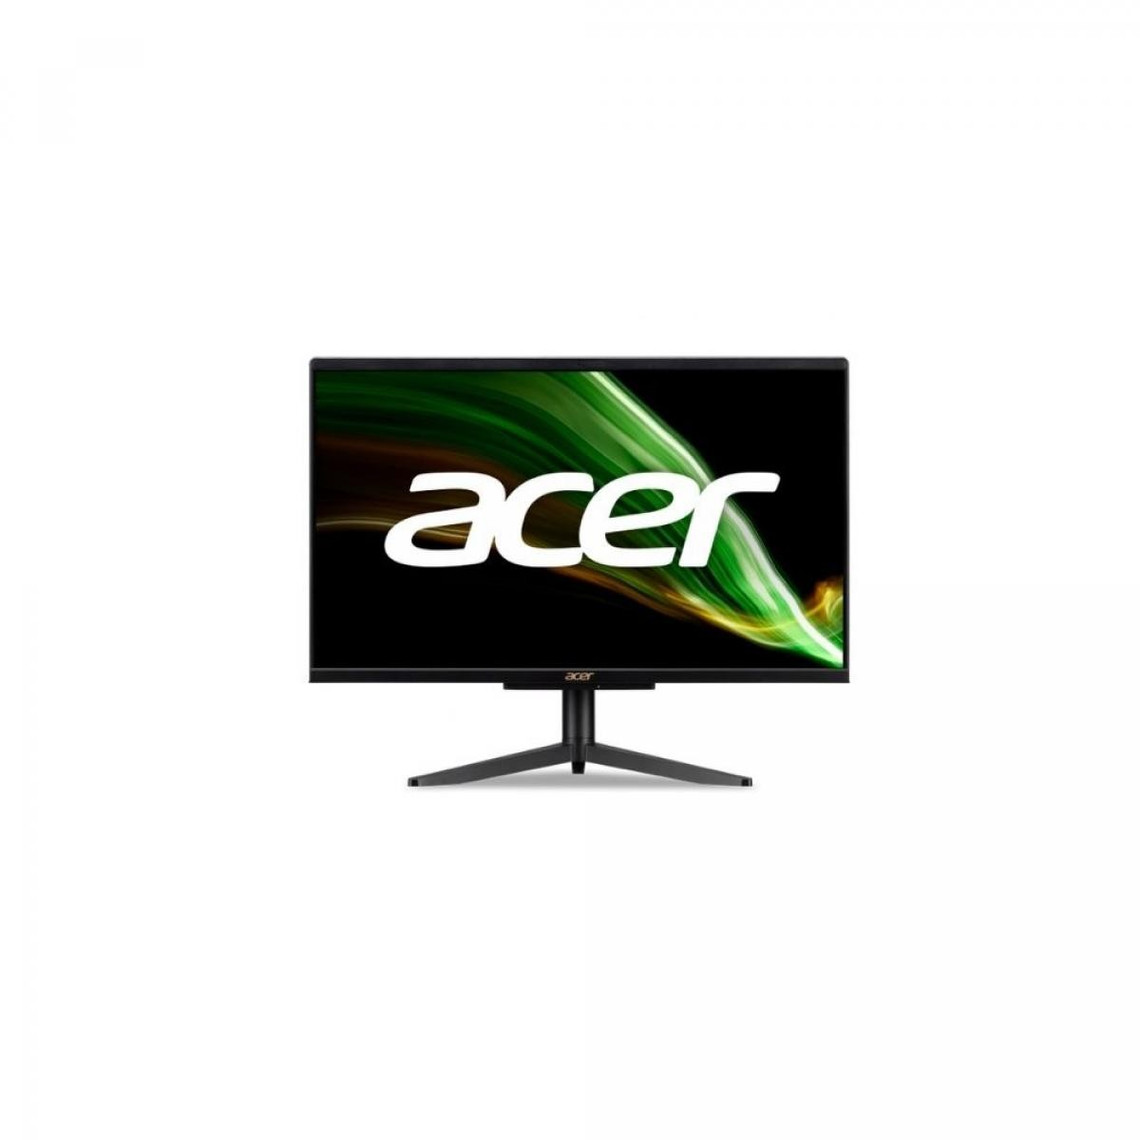 Acer All in One Acer Aspire C22-1600-003 Noir/or Intel® Pentium® Silver N6005 8Go 1 To 5400 Tpm Intel UHD Graphics Dalle 21,5